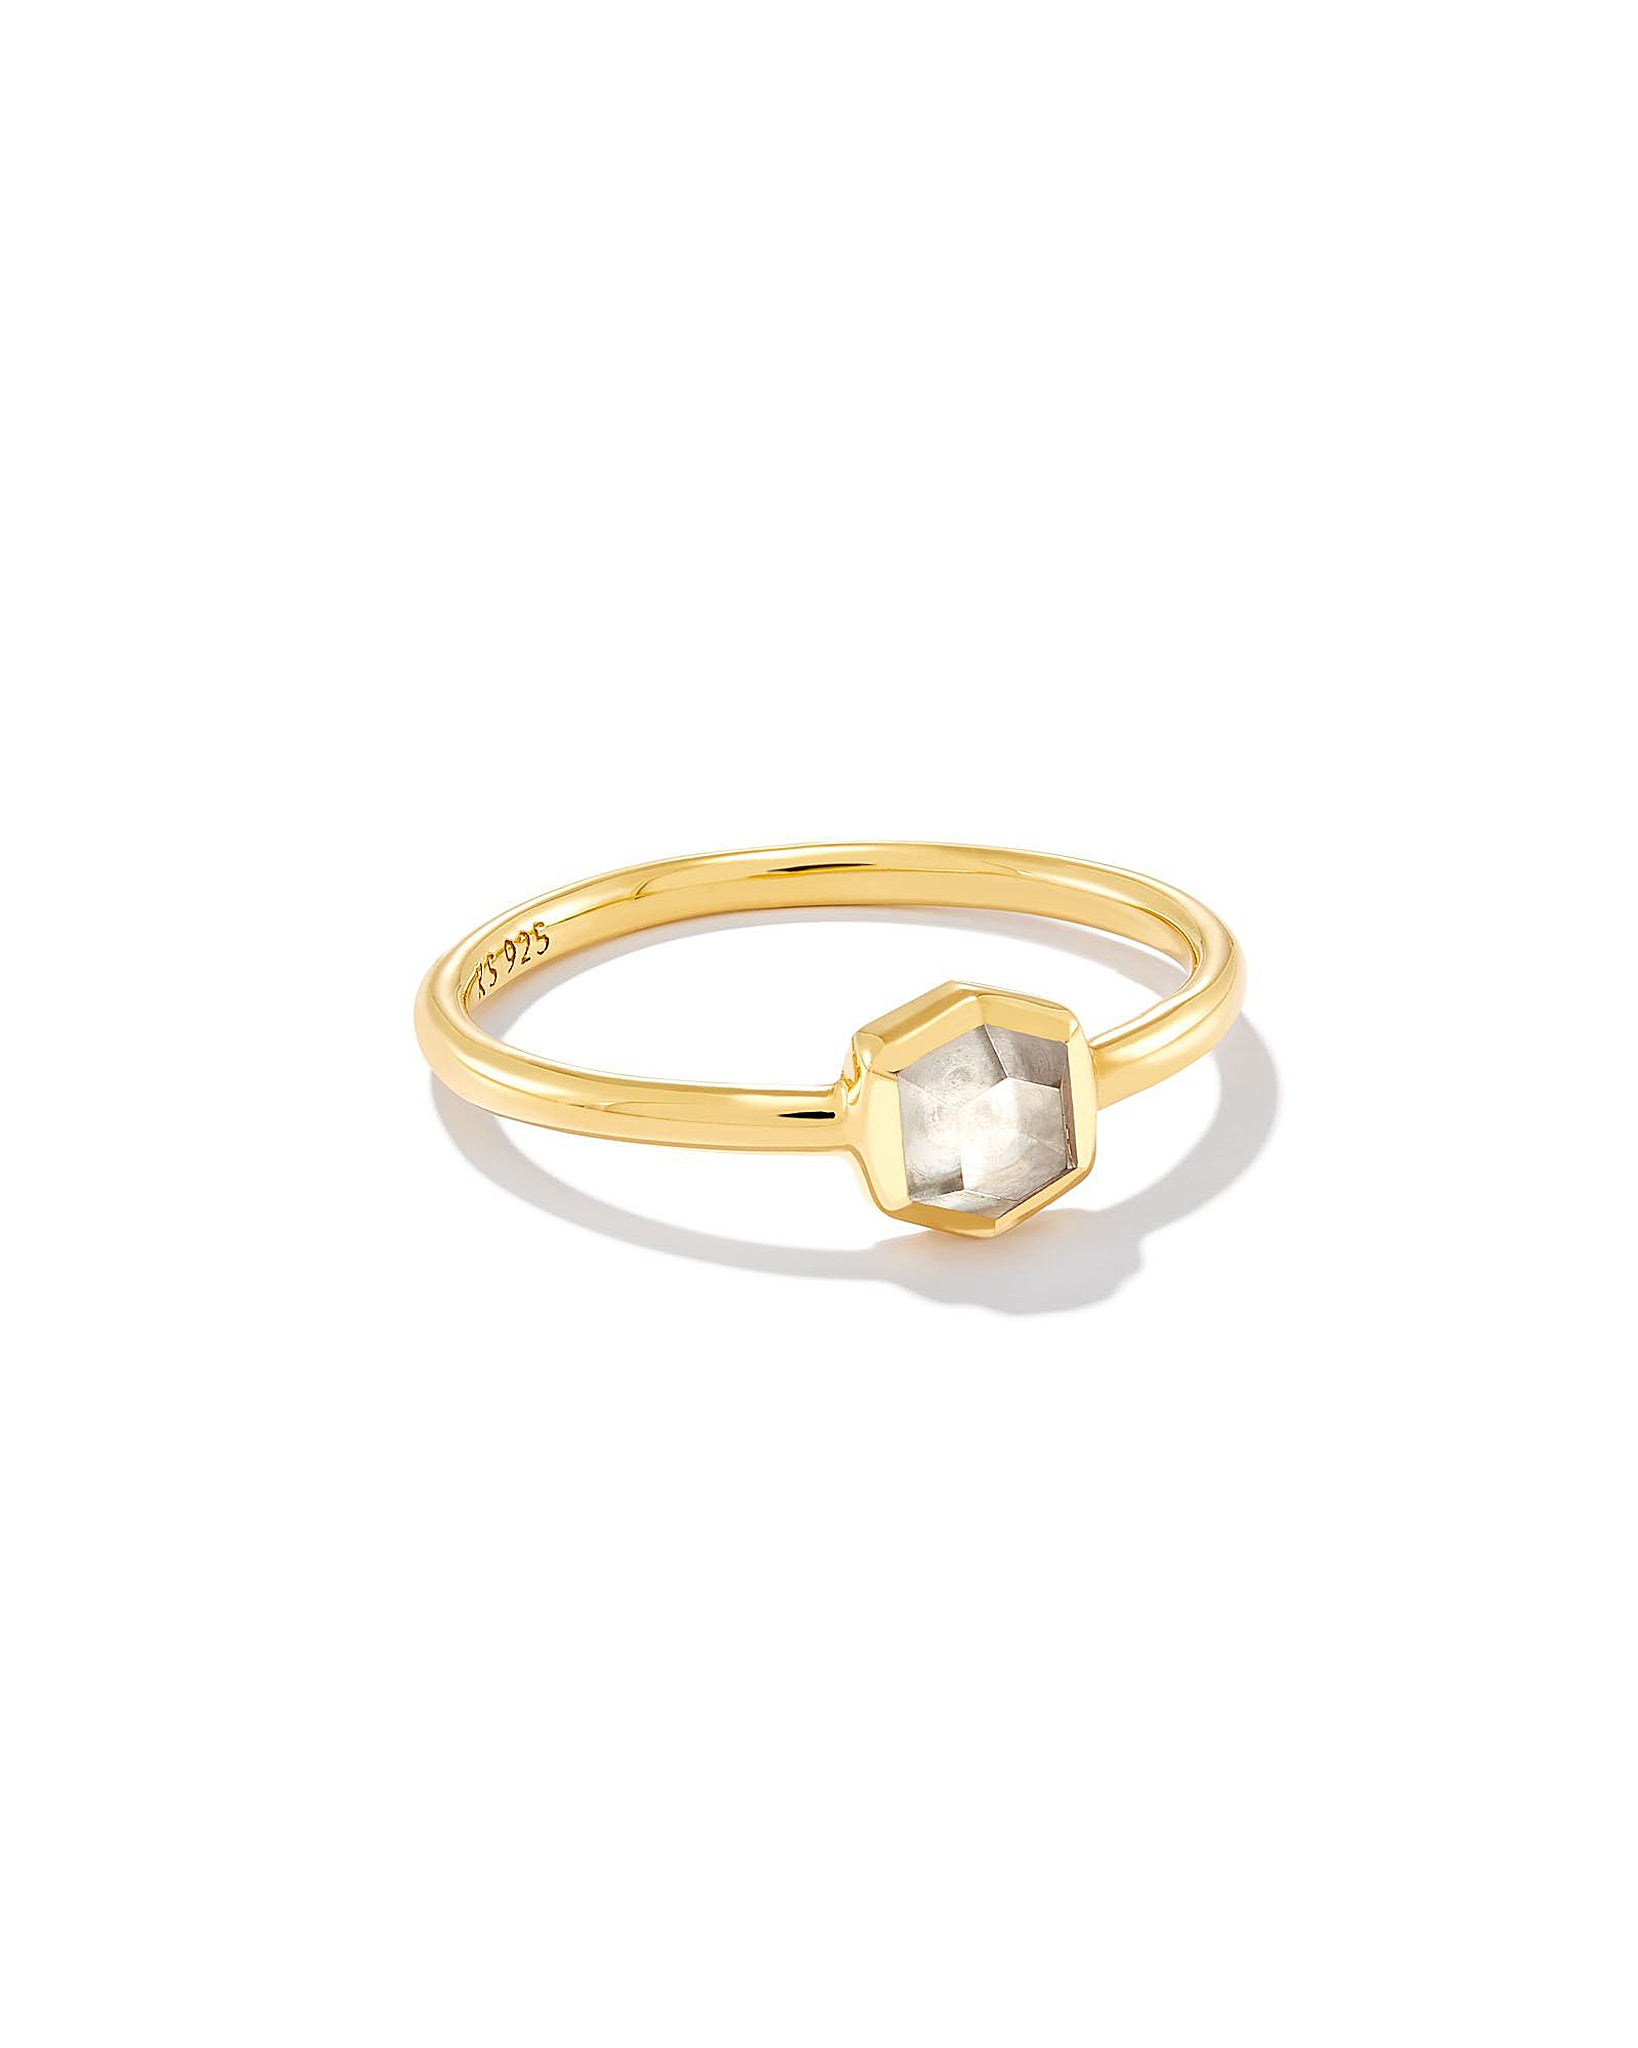 Kendra Scott Davie Band Ring in Clear Rock Crystal and 18k Gold Vermeil Size 6